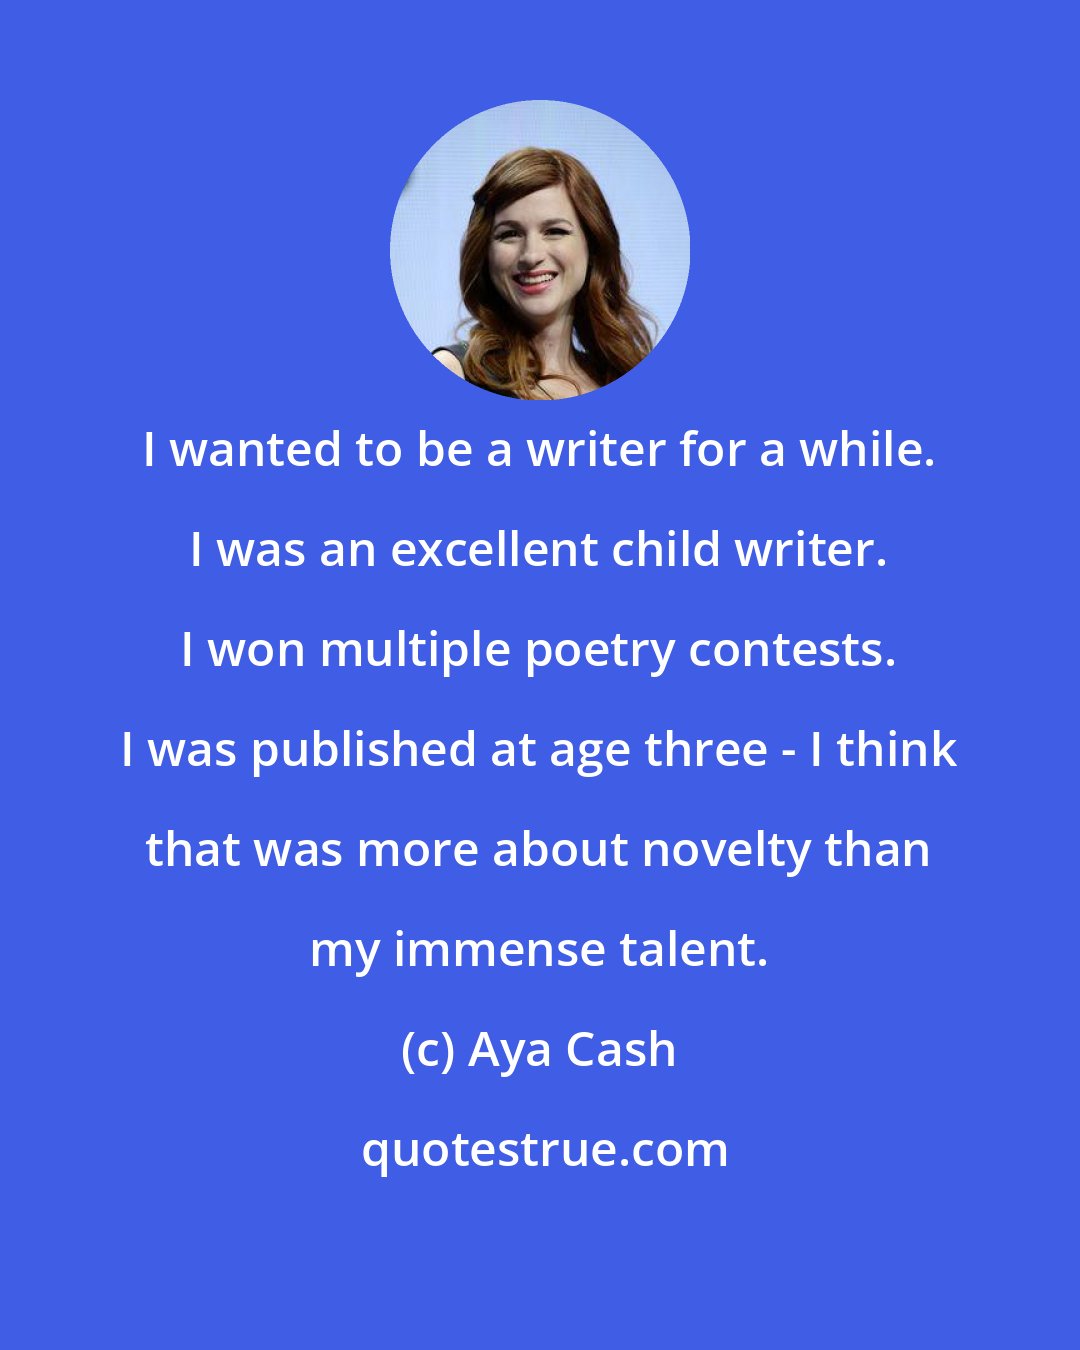 Aya Cash: I wanted to be a writer for a while. I was an excellent child writer. I won multiple poetry contests. I was published at age three - I think that was more about novelty than my immense talent.